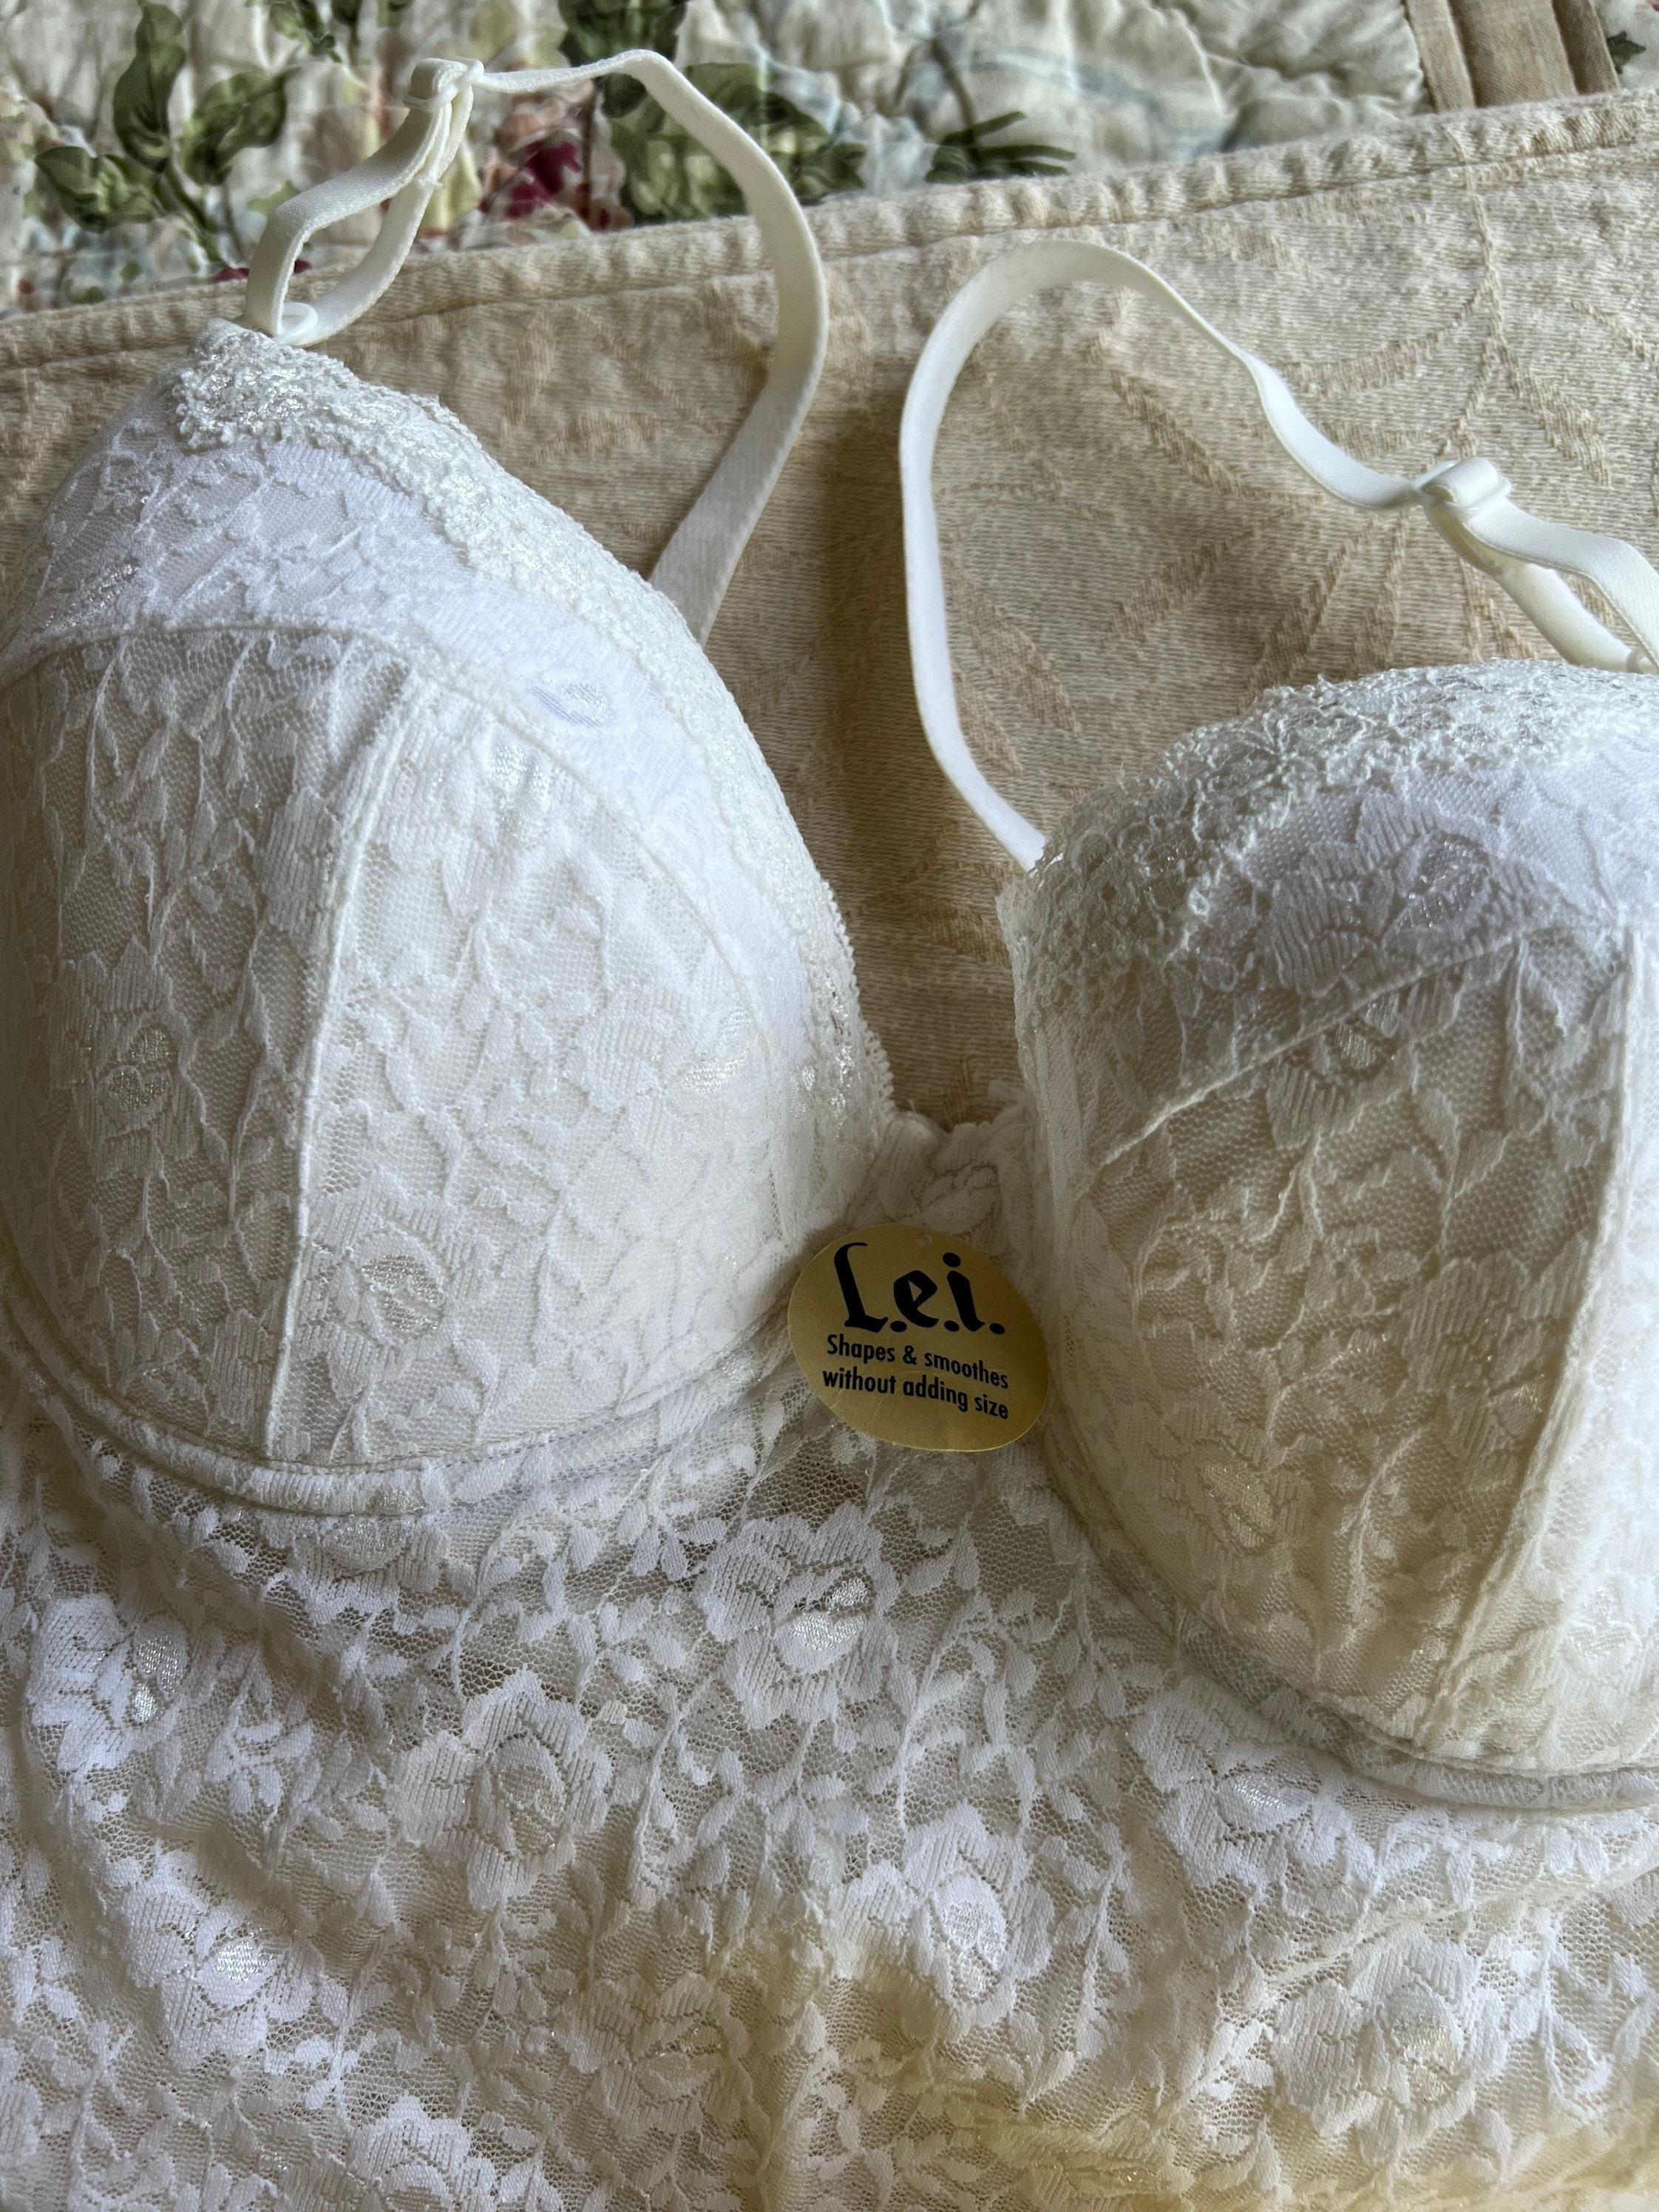 Gilligan & O'Malley 40 Band Bras & Bra Sets for Women for sale